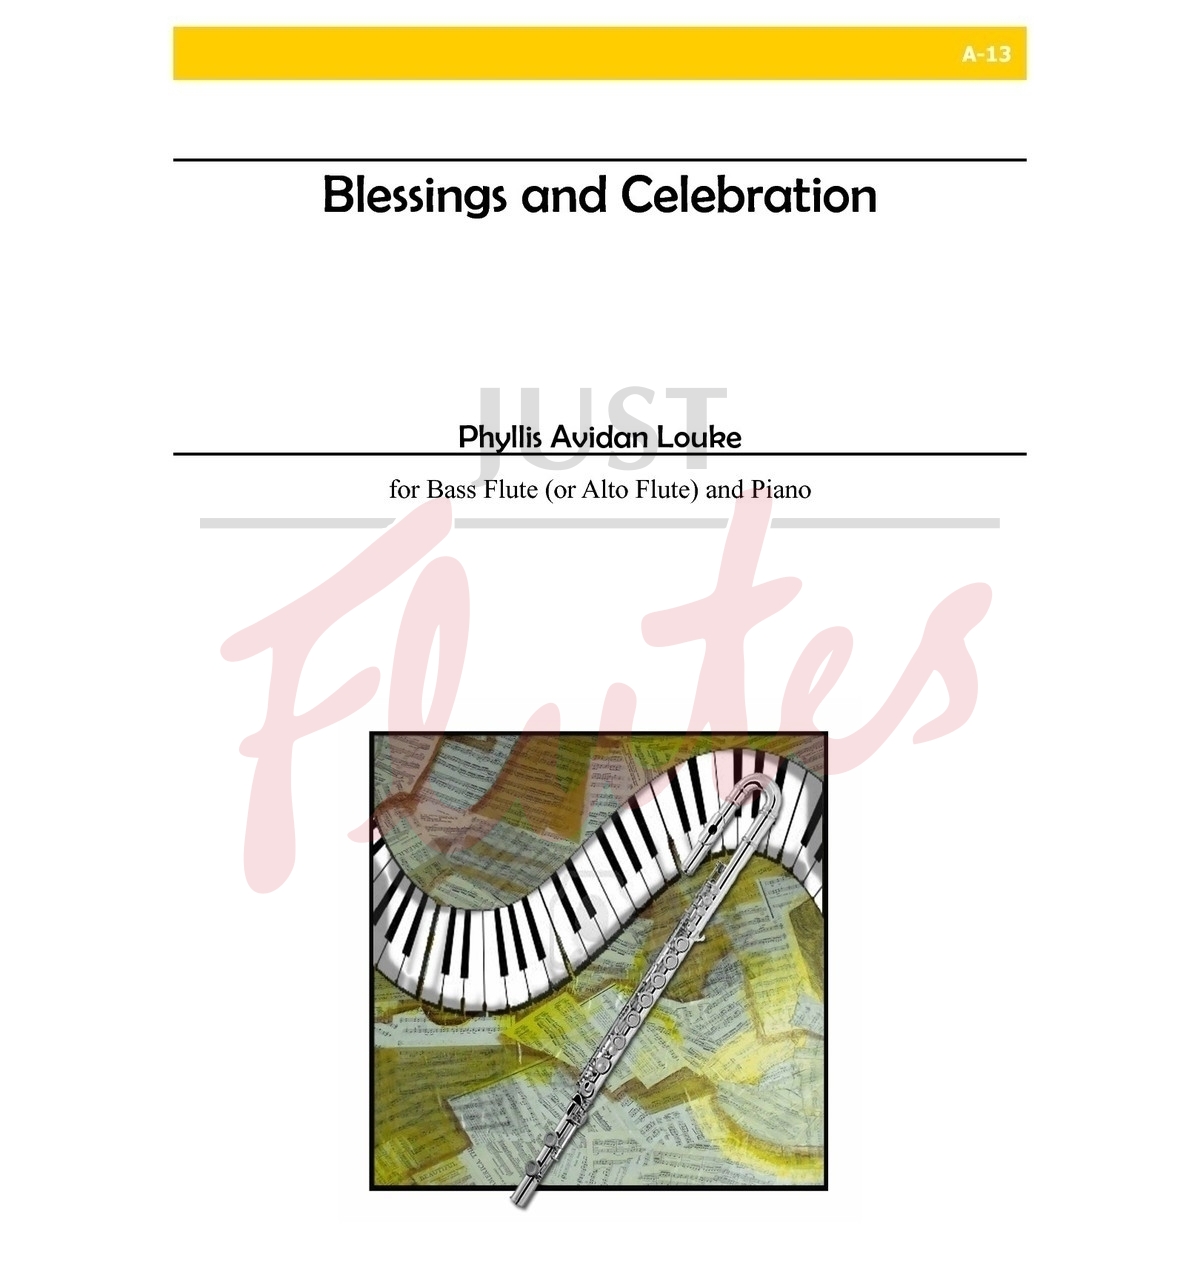 Blessings and Celebration for Bass or Alto Flute and Piano